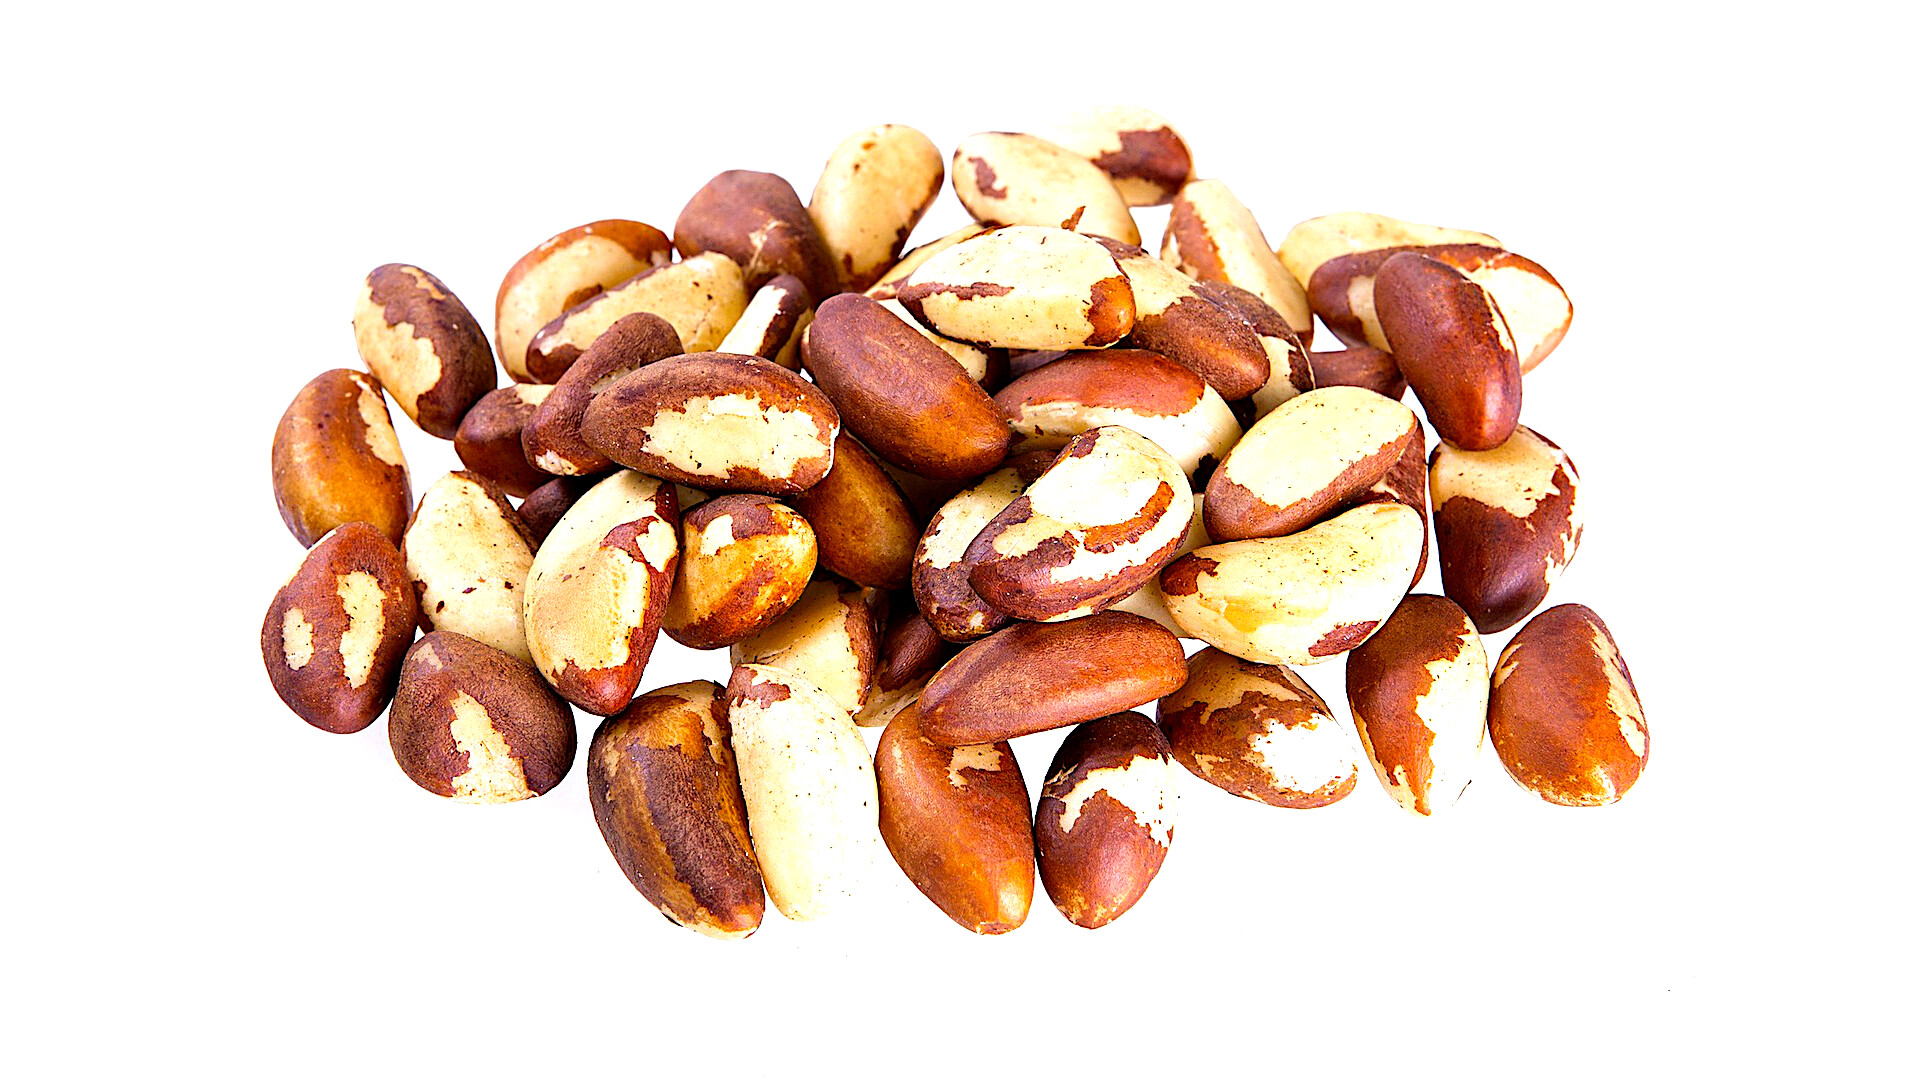 brazil-nut-allergy-test-why-is-it-done-and-what-the-results-mean-storymd